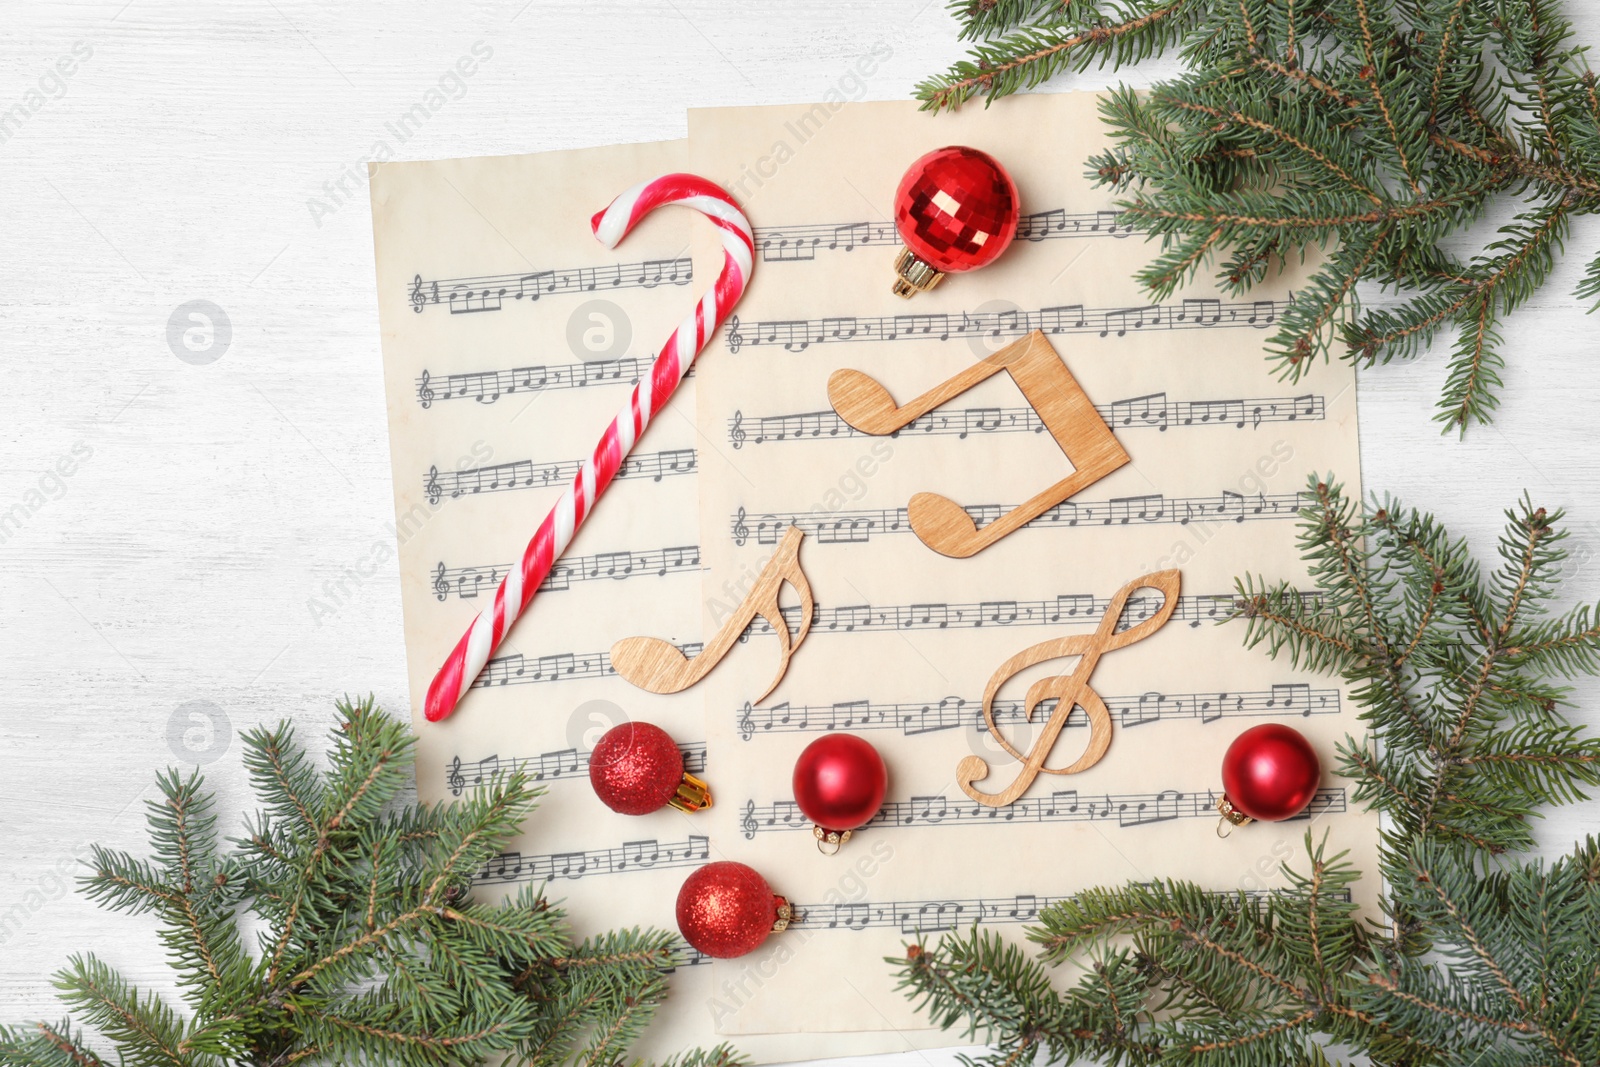 Photo of Composition with music notes and decorations on wooden background, top view